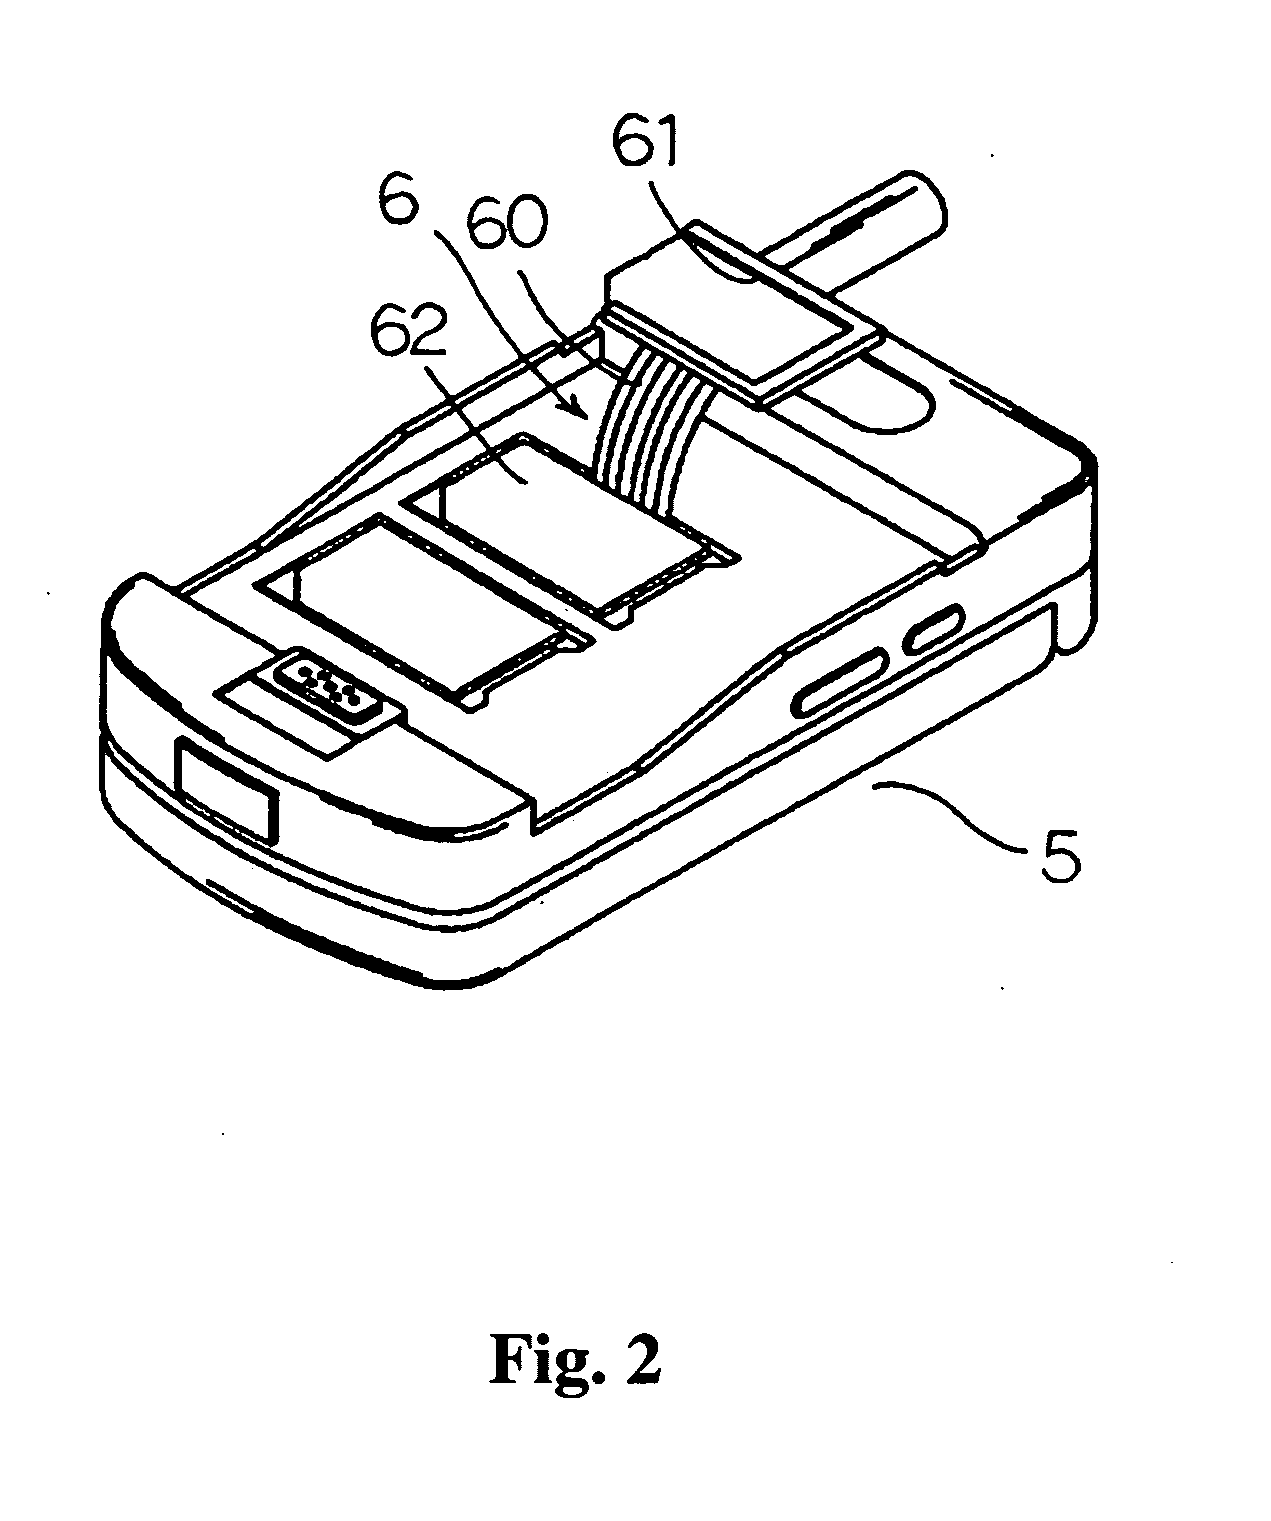 Functional module improvement structure for expanded and enhanced SIM card